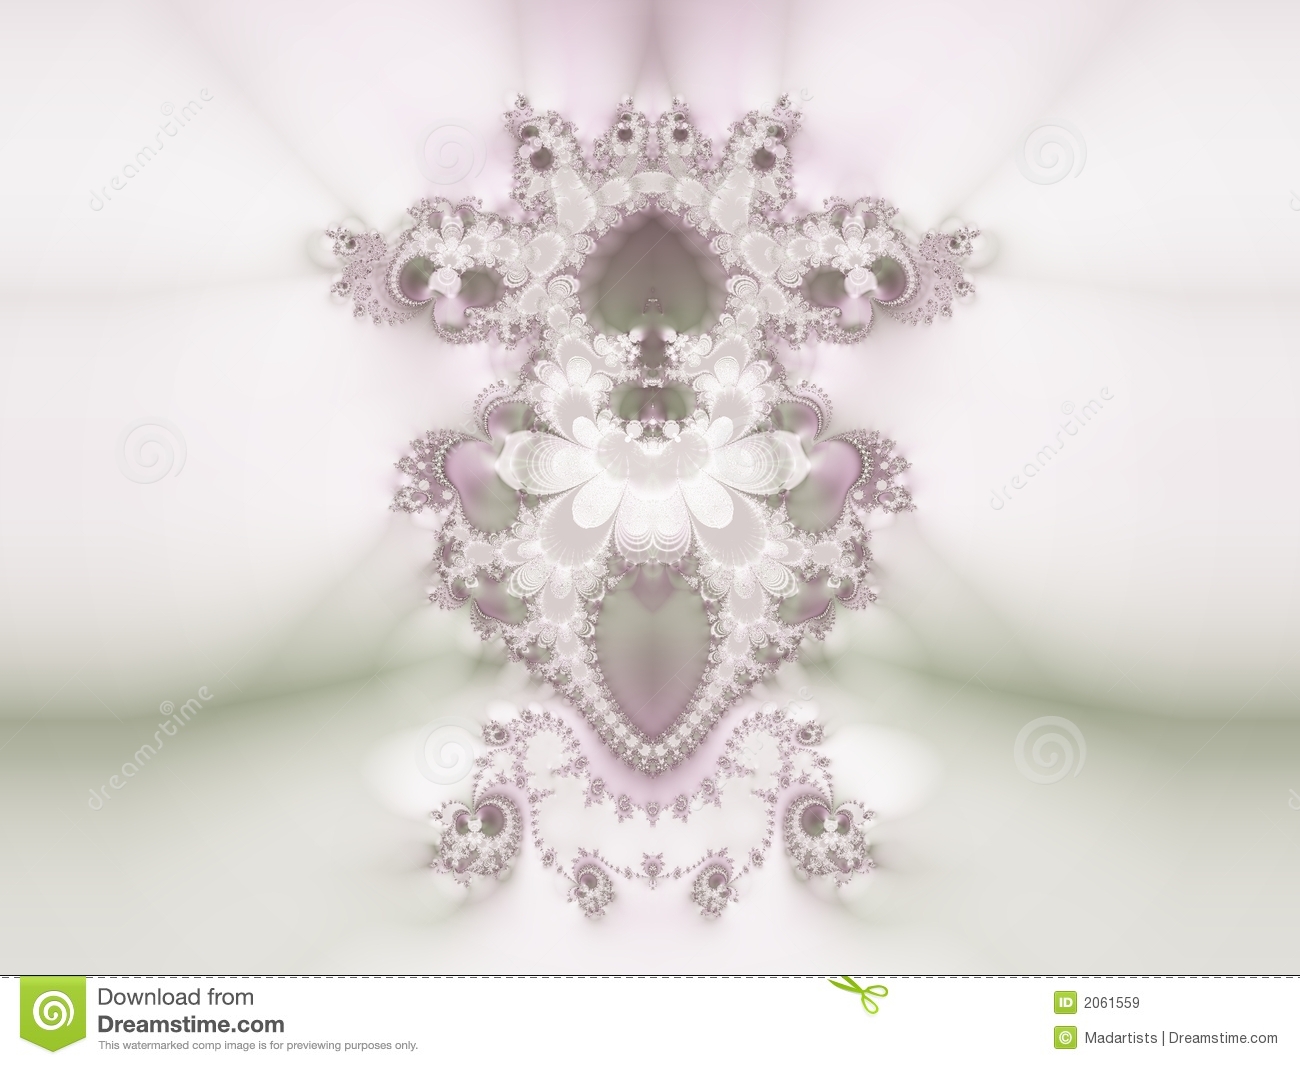 Bouquet Digital Fractal Art Rendering With Lace And Floral Designs